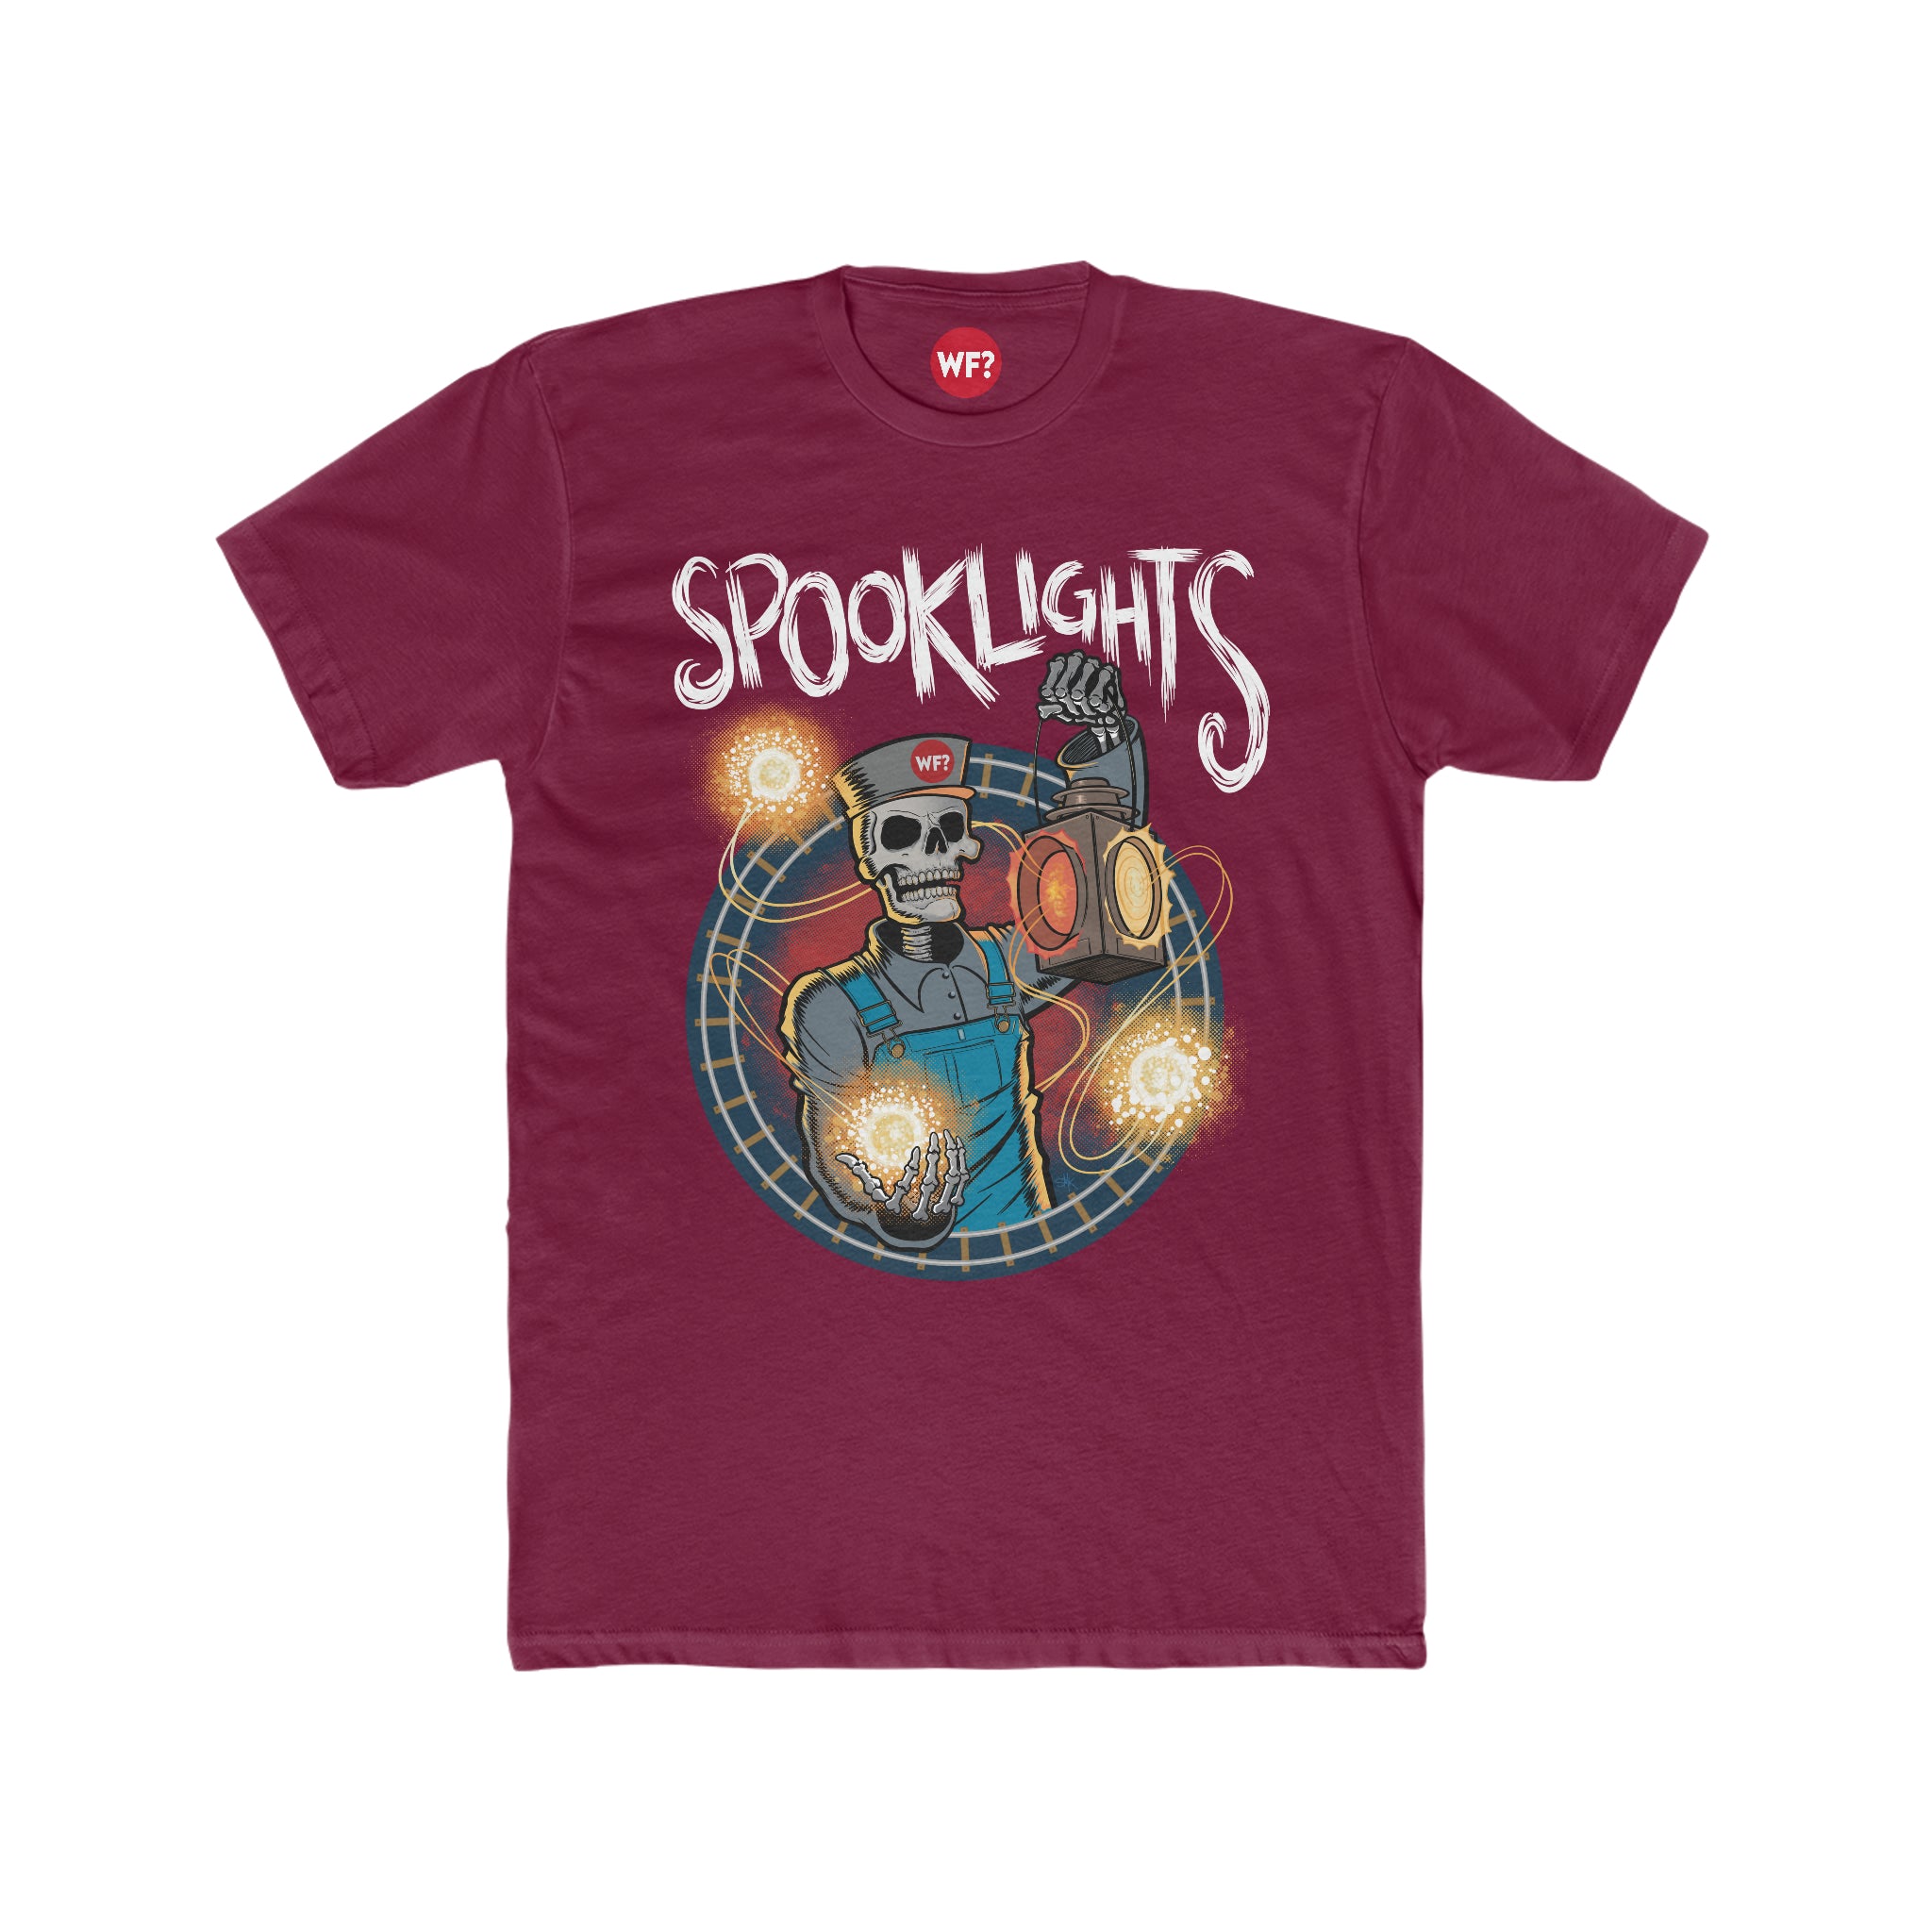 Buy solid-cardinal-red Spooklights Limited T-Shirt